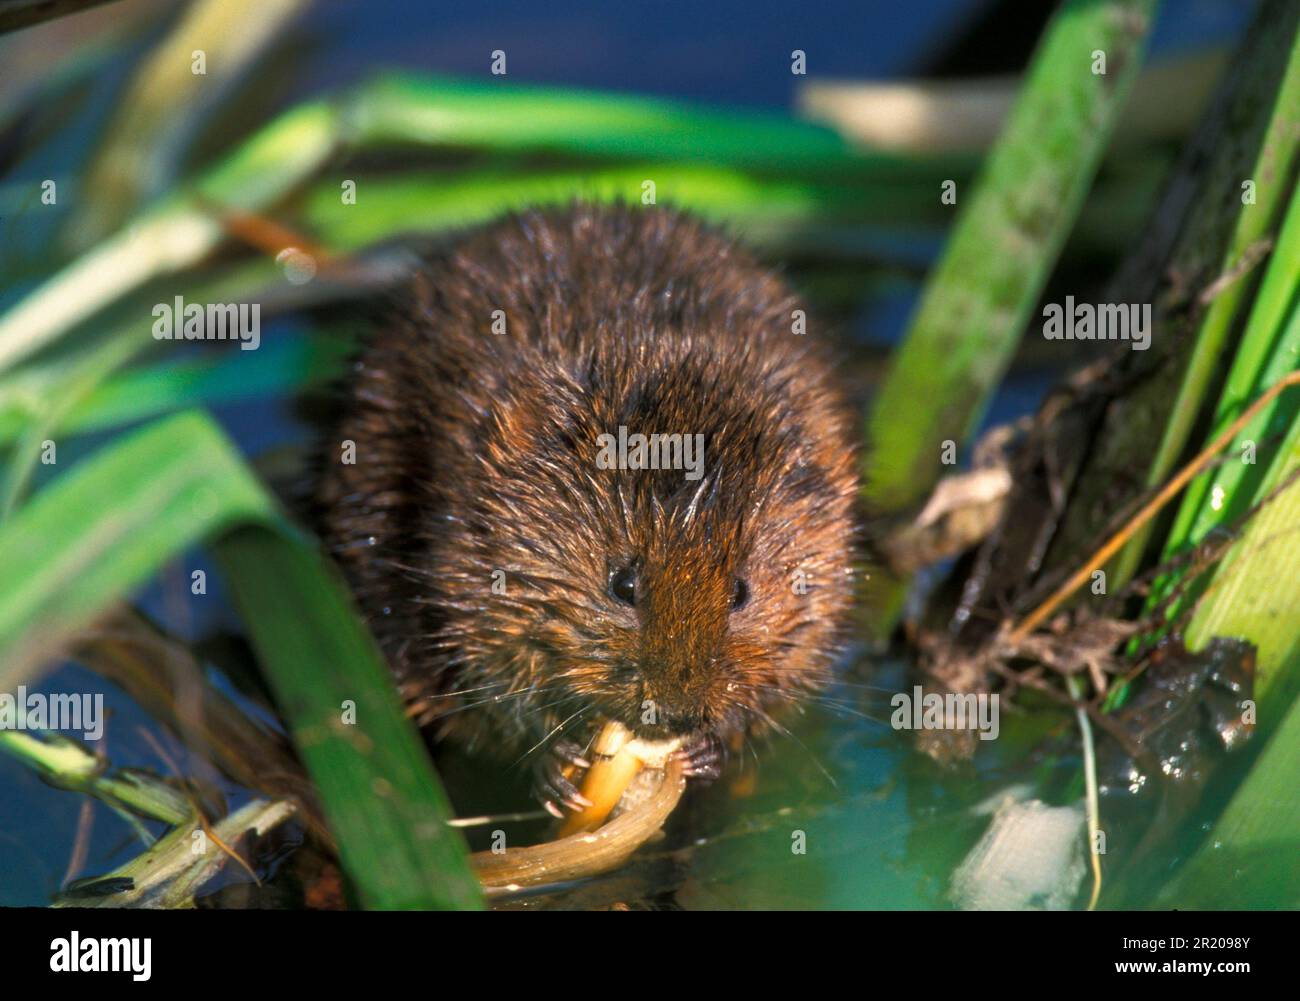 Eastern shrew, european water voles (Arvicola terrestris), water rat, shrew, meadow vole, water rats, shrews, meadow voles, mice, mouse, rodents Stock Photo